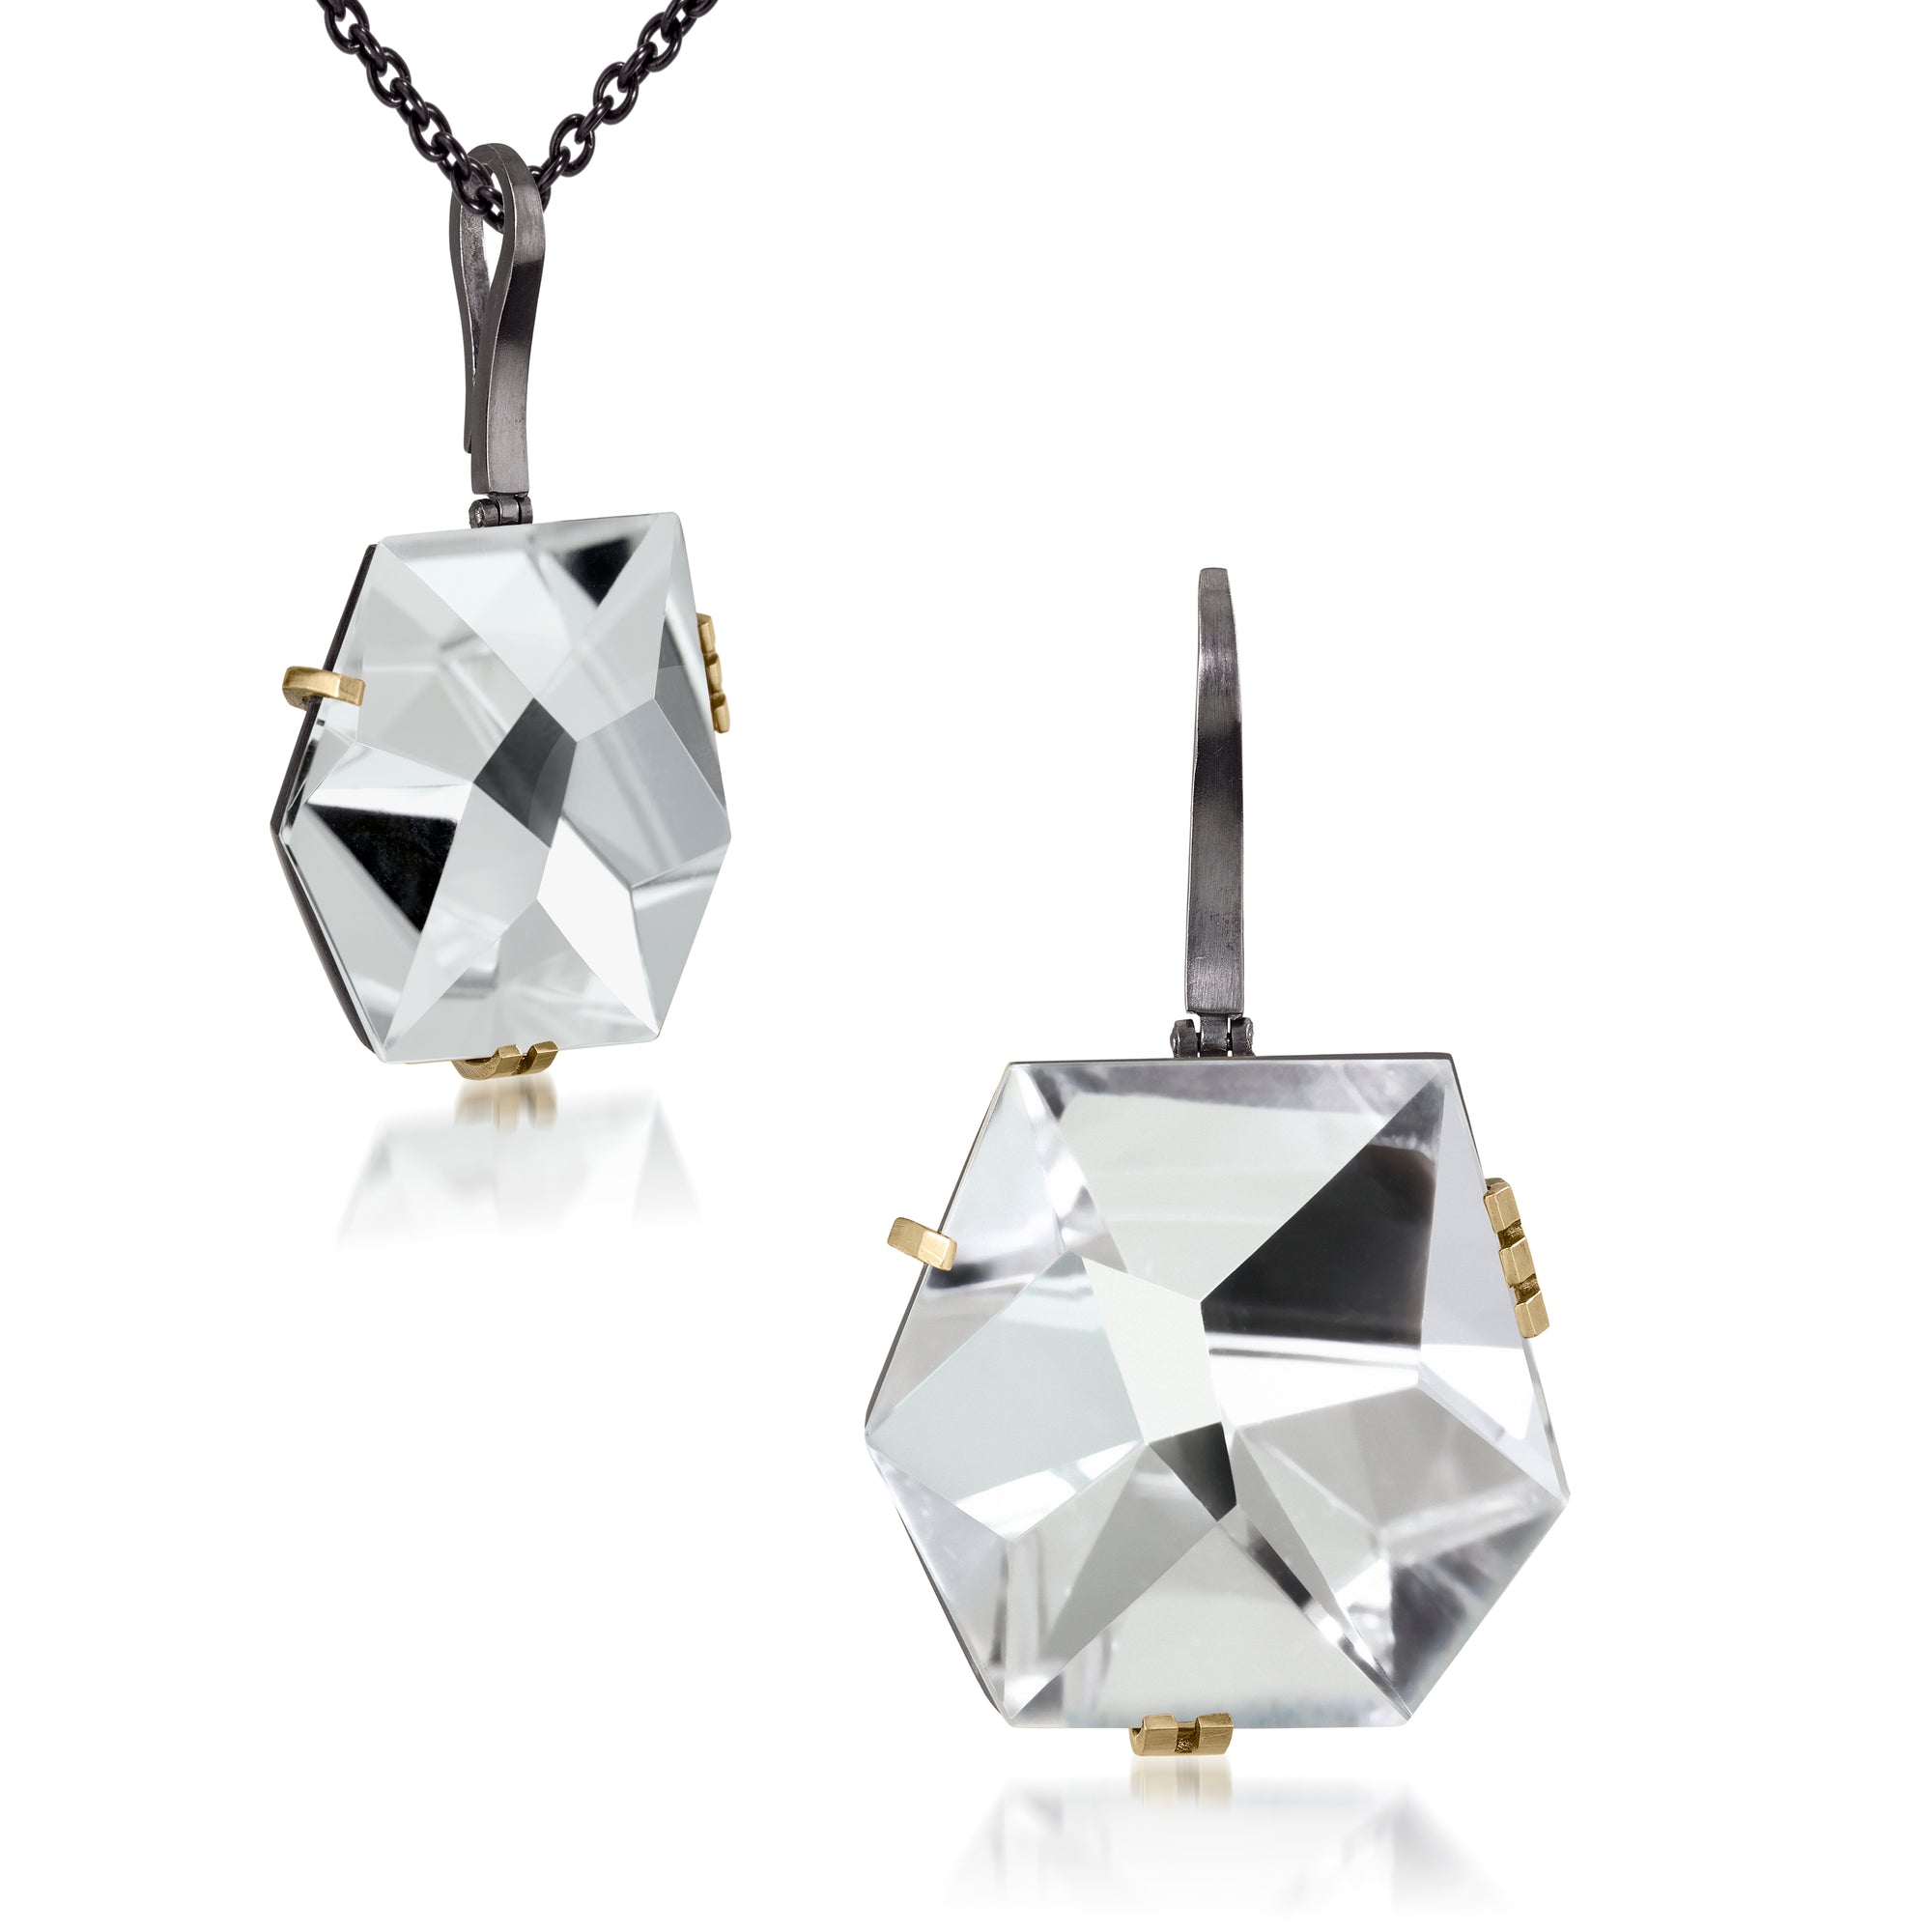 This large Facets pendant in oxidized sterling and 18k gold is set with natural gemstone. The irresistible, oversized gem pendant has amazing presence. Unique, hand cut faceted chunks of gemstone prong set in 18k gold prongs hanging from a small bail of 18k gold or oxidized silver.  